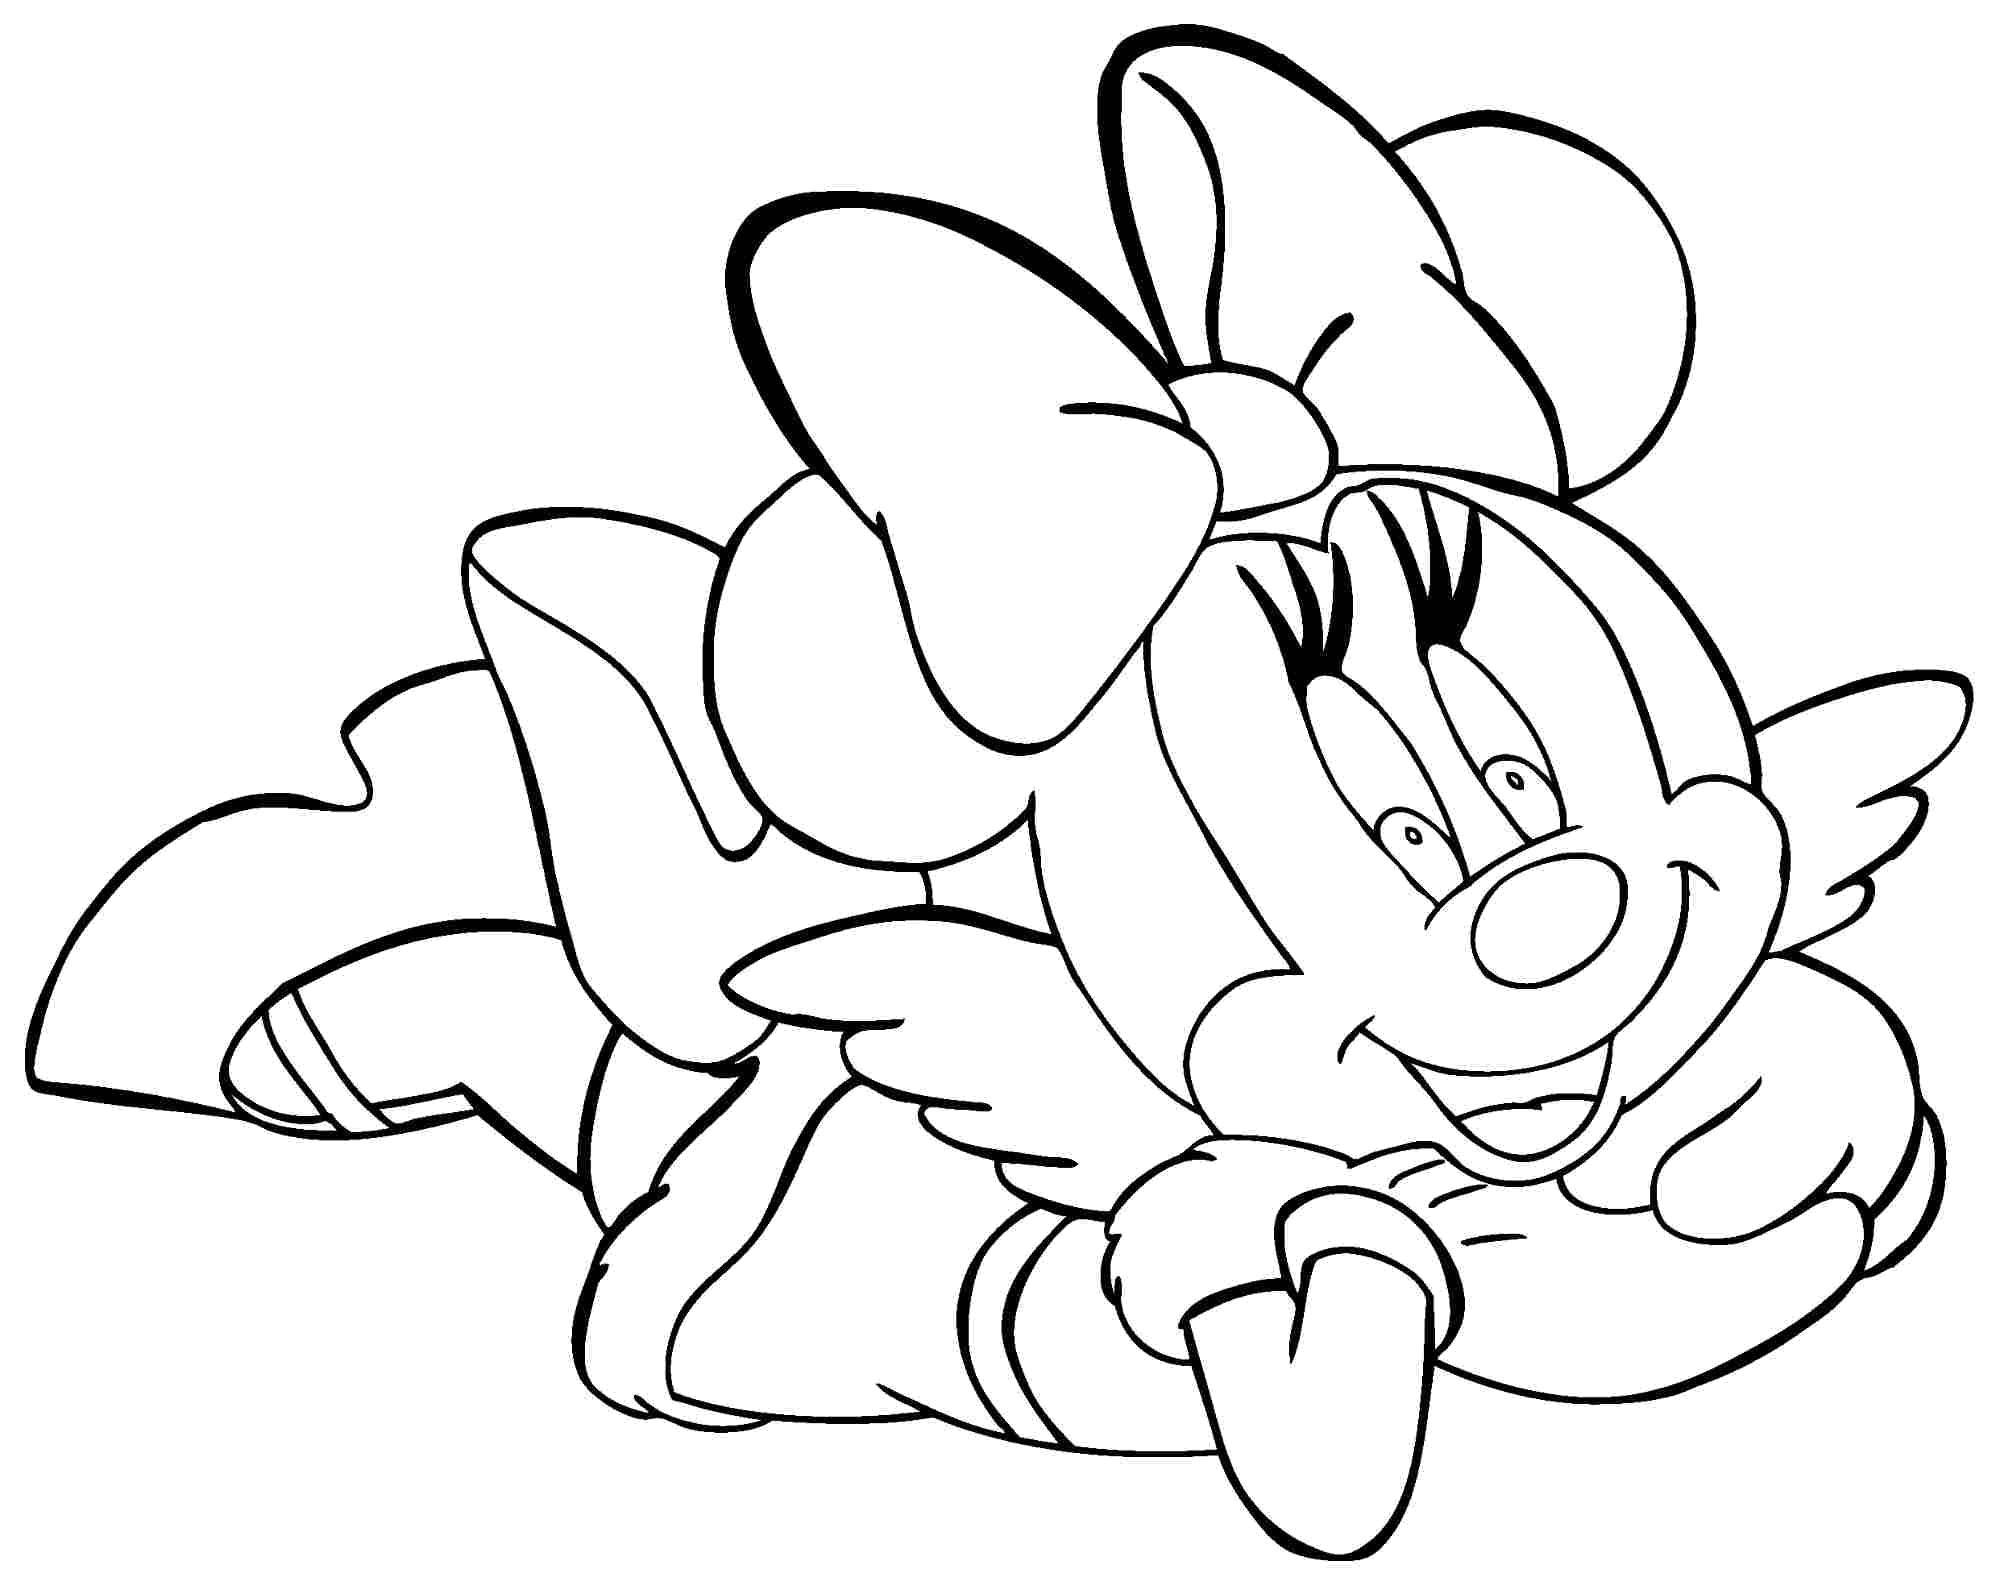 Coloring Minnie mouse. Category cartoons. Tags:  Disney, Mickey Mouse, Minnie Mouse.